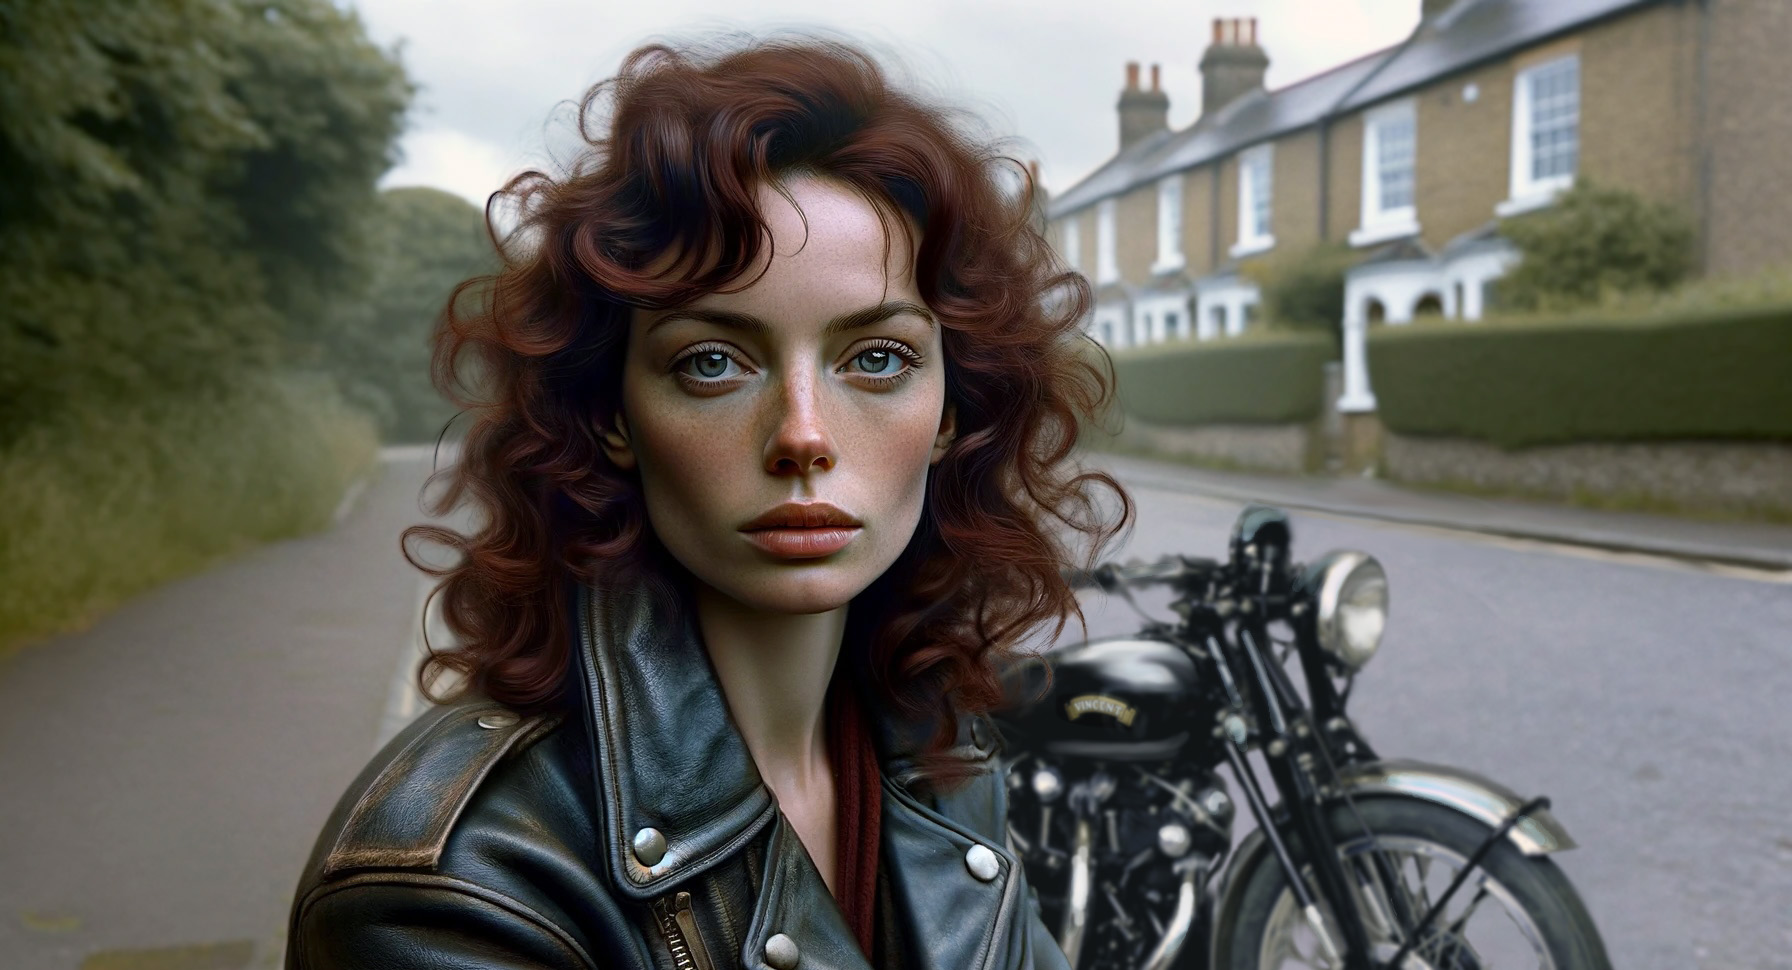 Portrait of a woman with curly red hair and blue eyes wearing a black leather jacket, standing in front of a classic motorcycle parked on a suburban road.